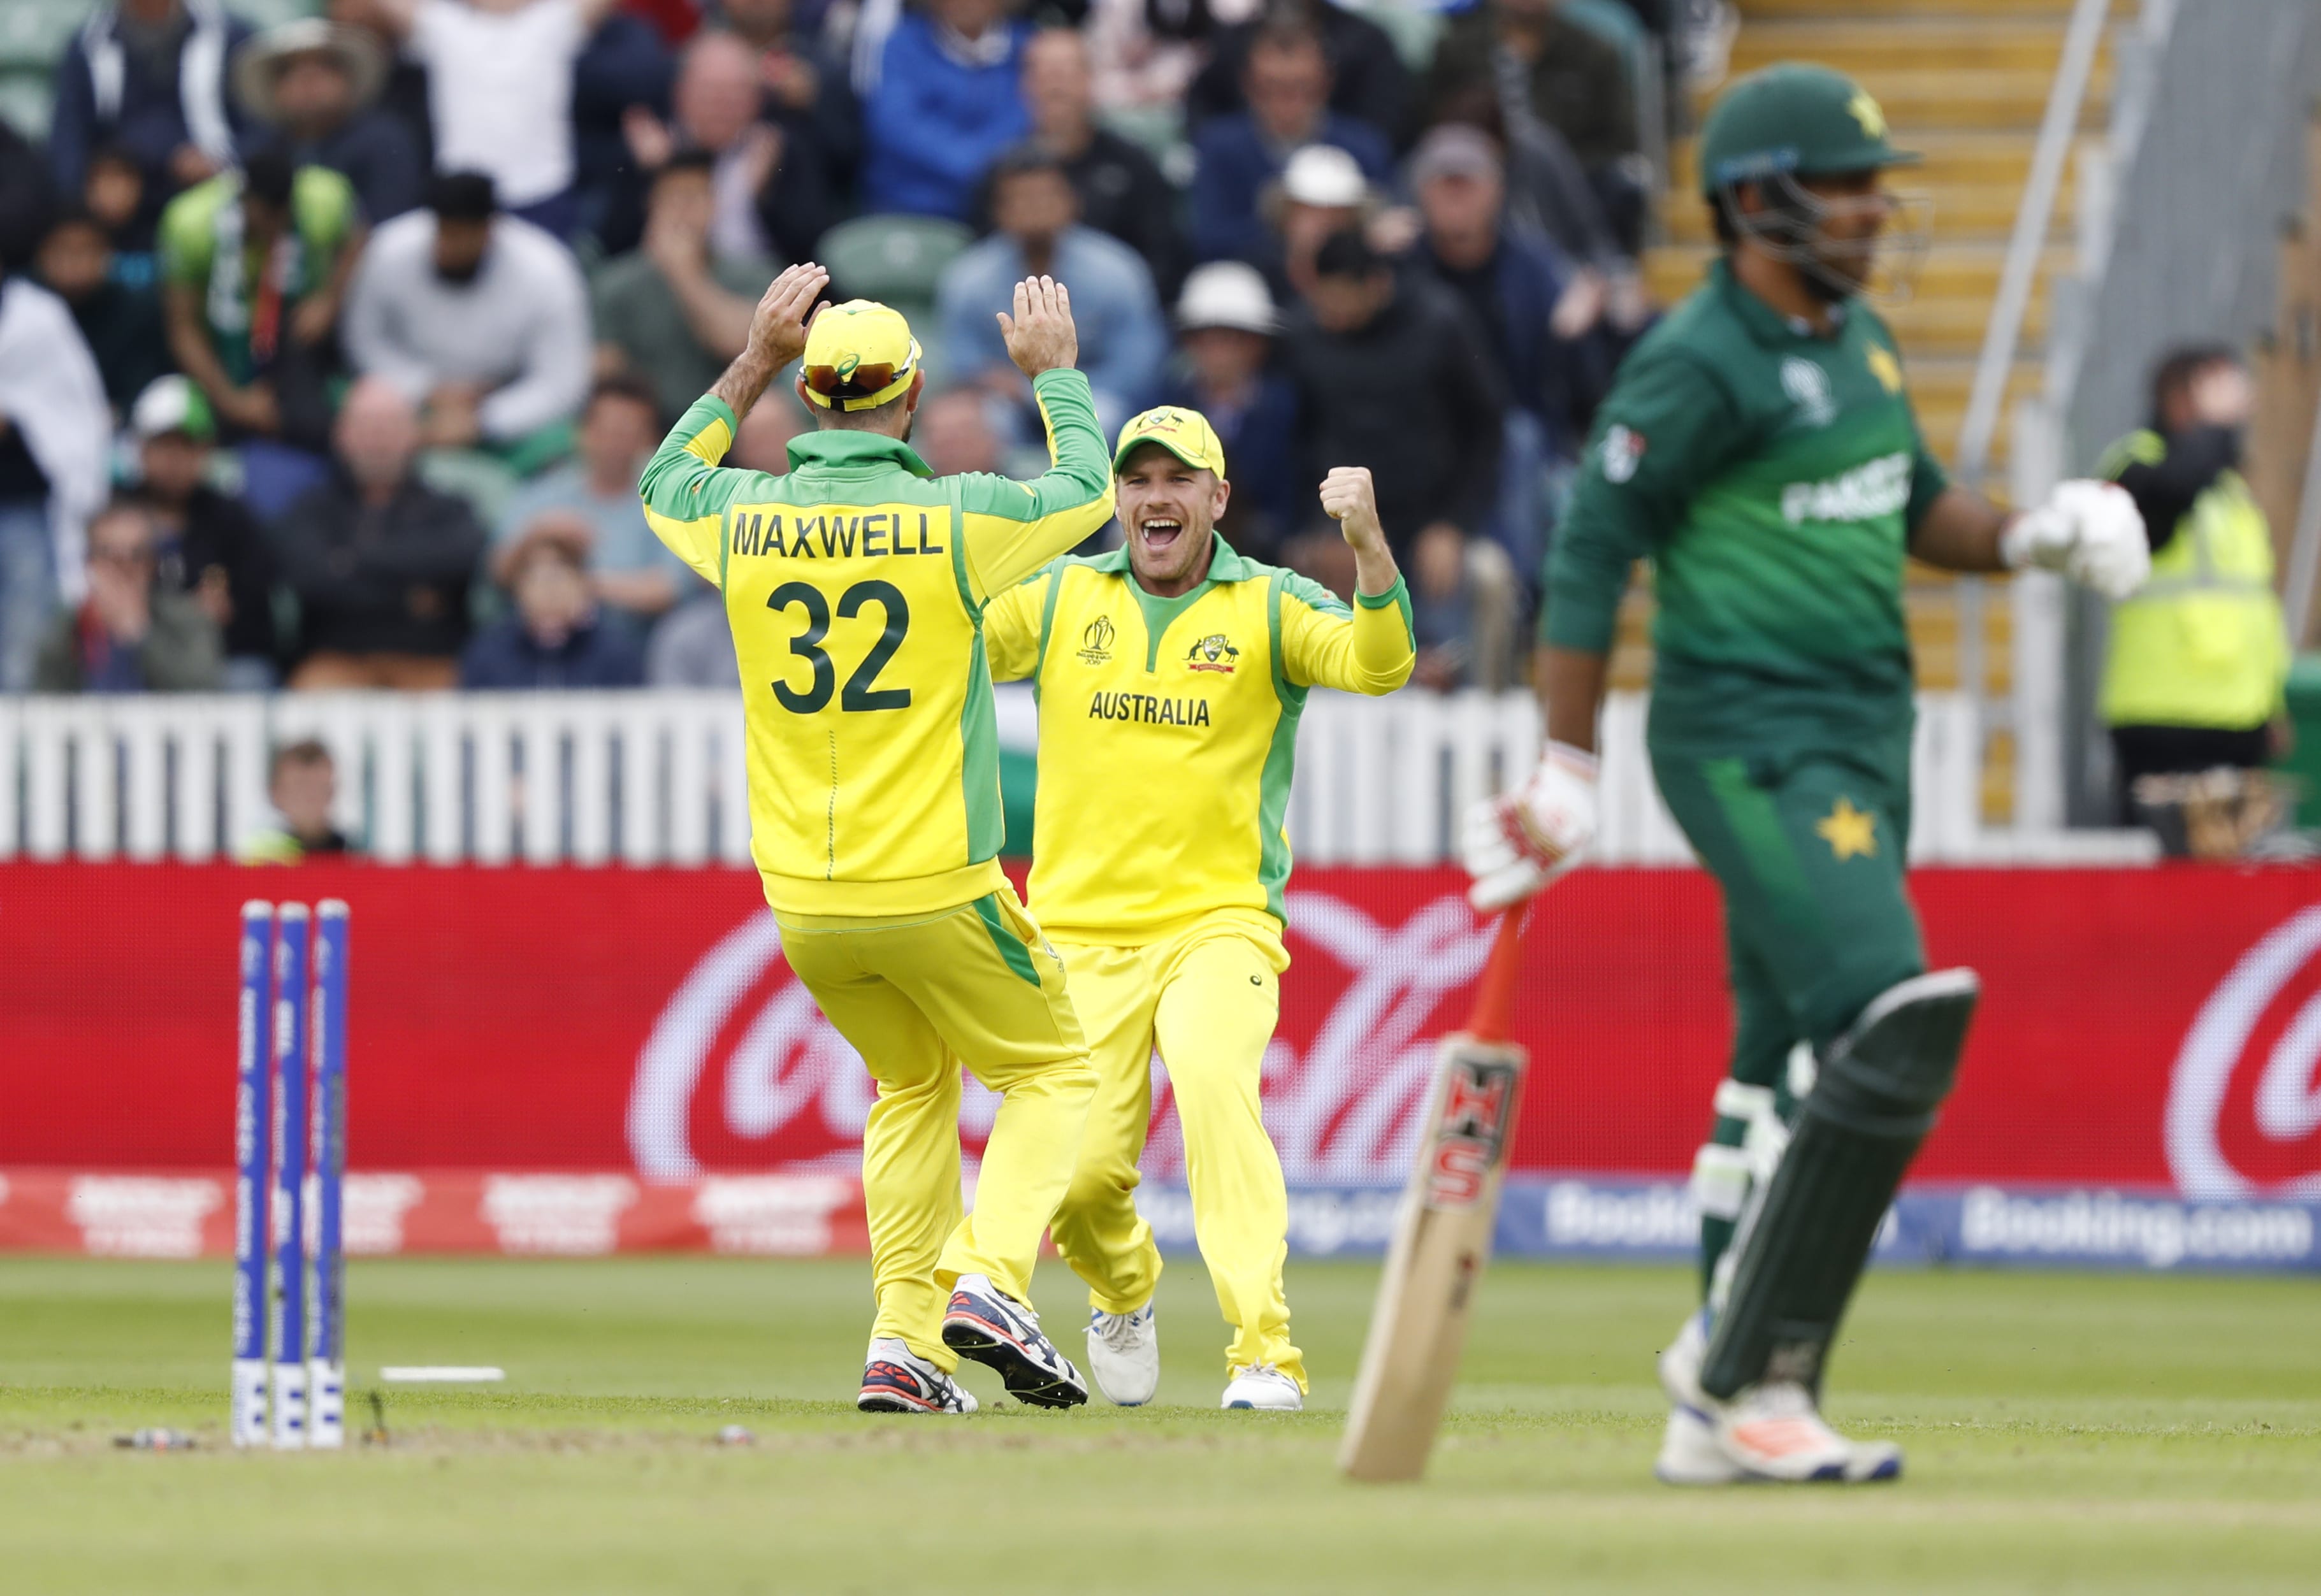 WC 2019: Defending champions outplay Pakistan by 41 runs